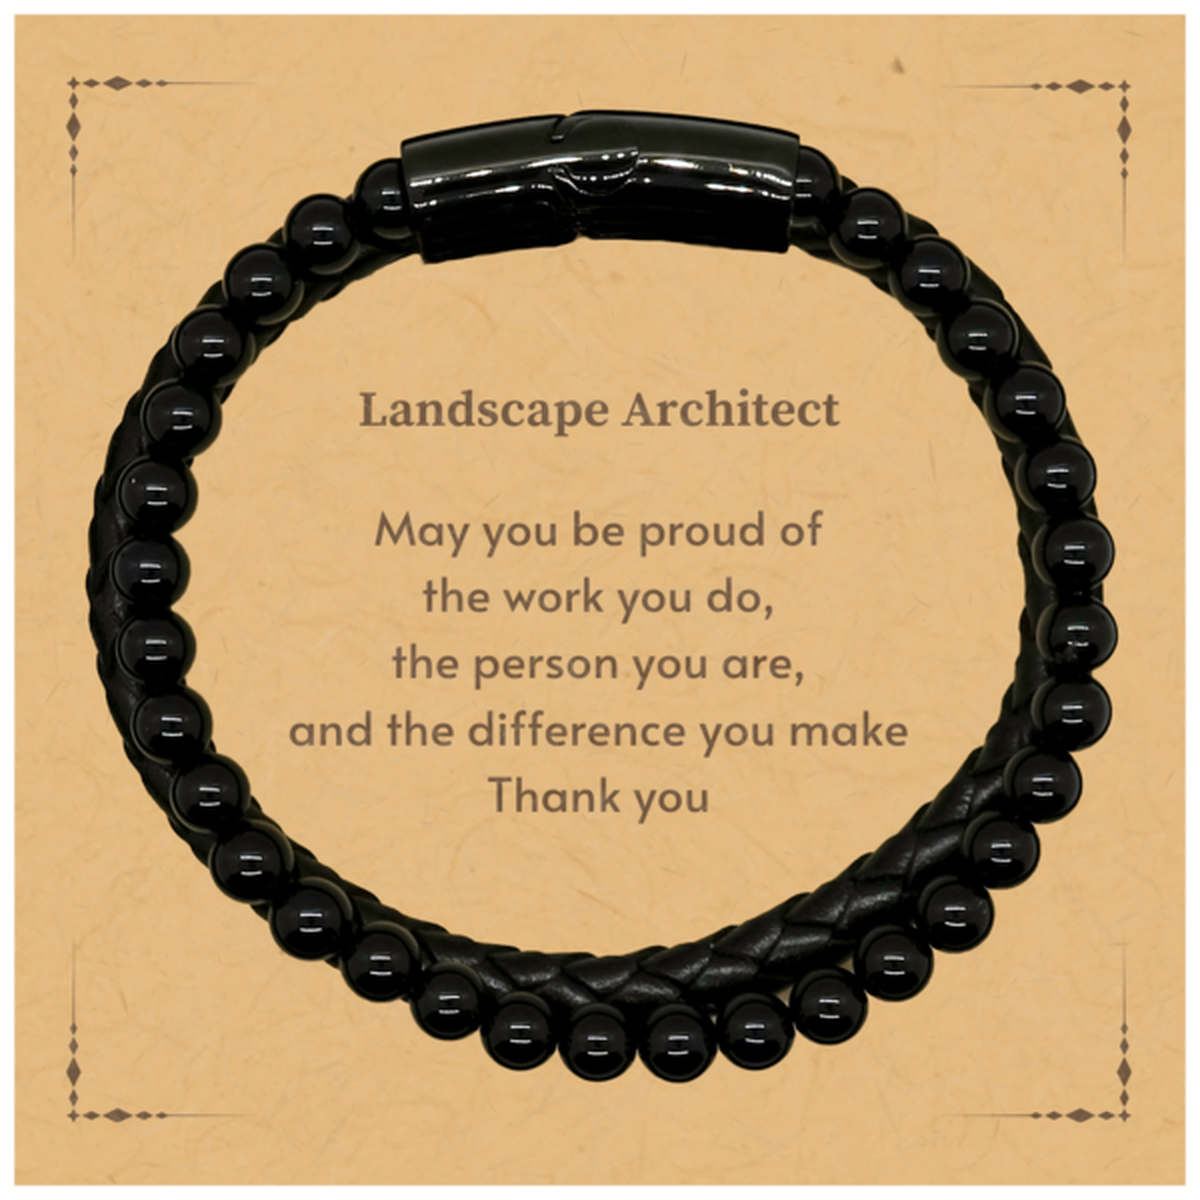 Heartwarming Stone Leather Bracelets Retirement Coworkers Gifts for Landscape Architect, Landscape Architect May You be proud of the work you do, the person you are Gifts for Boss Men Women Friends